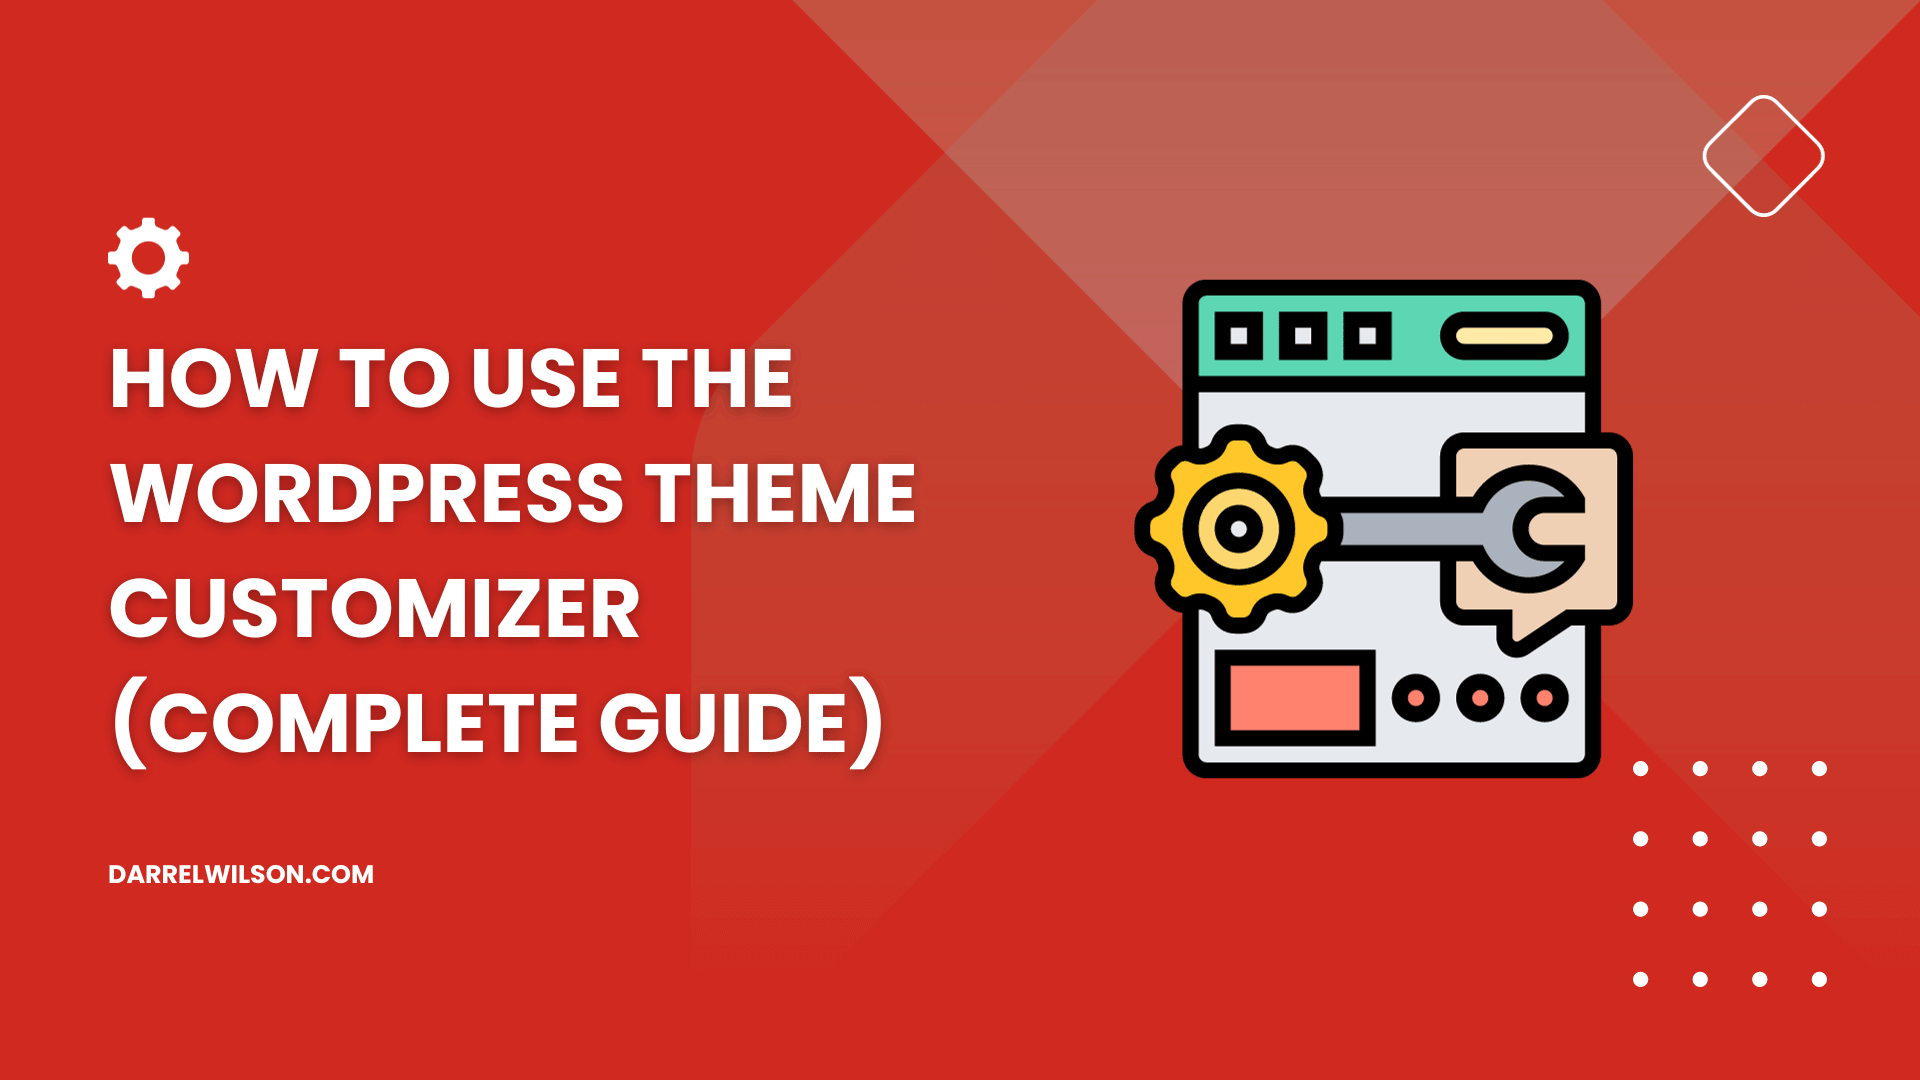 How to Use the WordPress Theme Customizer (Complete Guide)